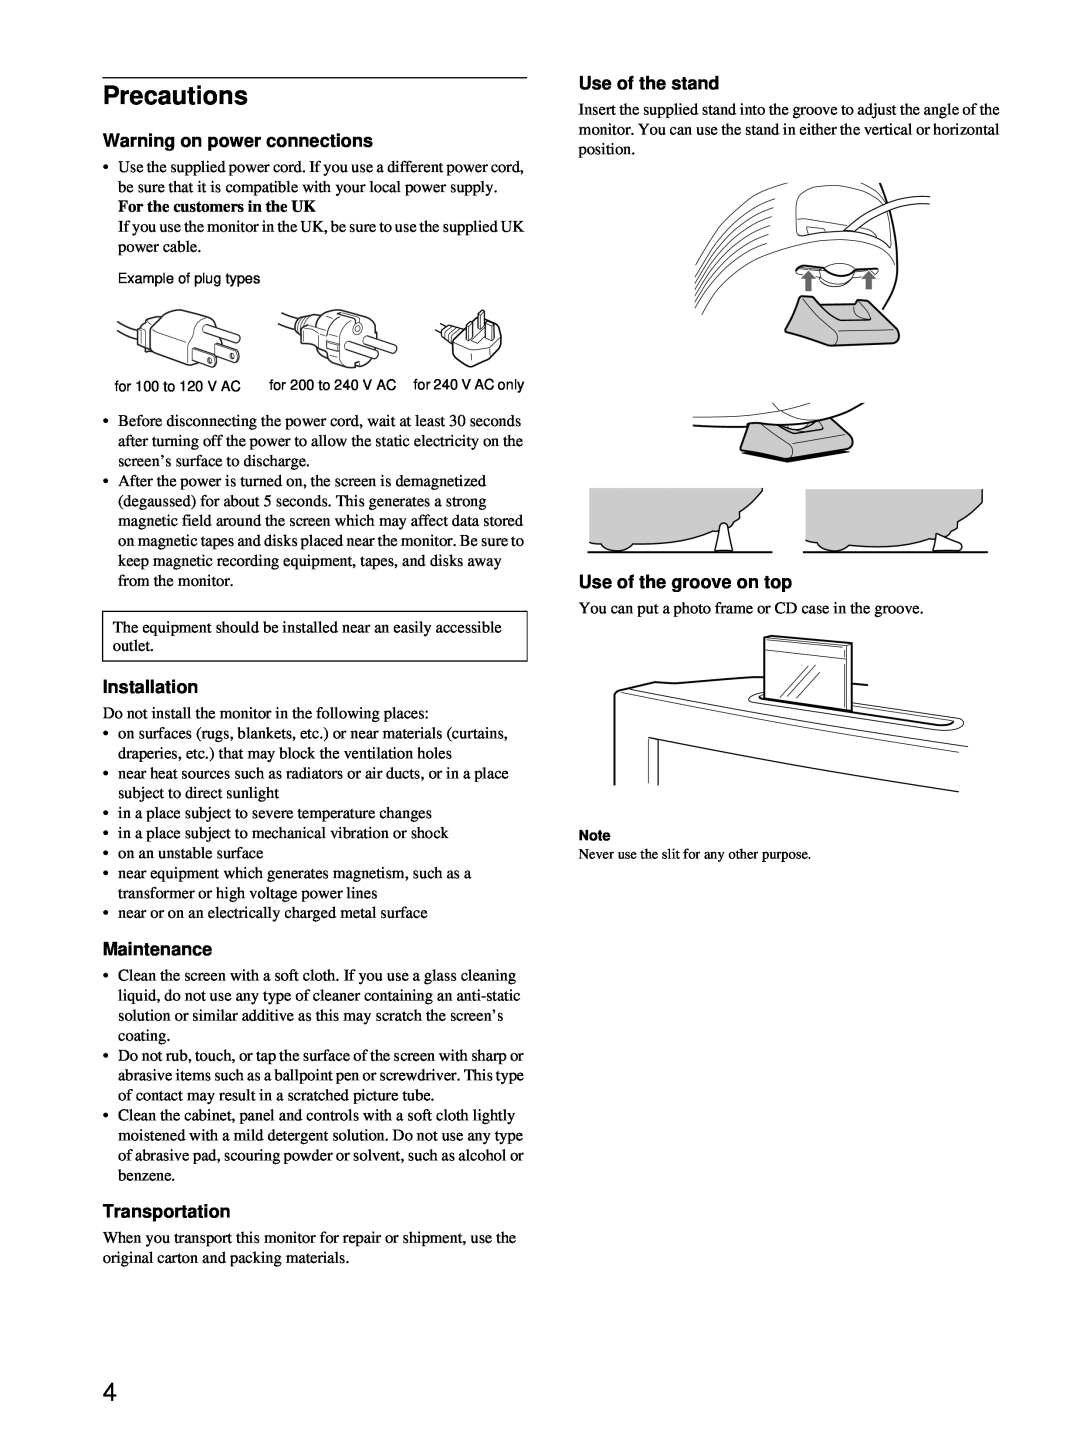 Sony HMD-A220 Precautions, Warning on power connections, Use of the stand, Installation, Maintenance, Transportation 